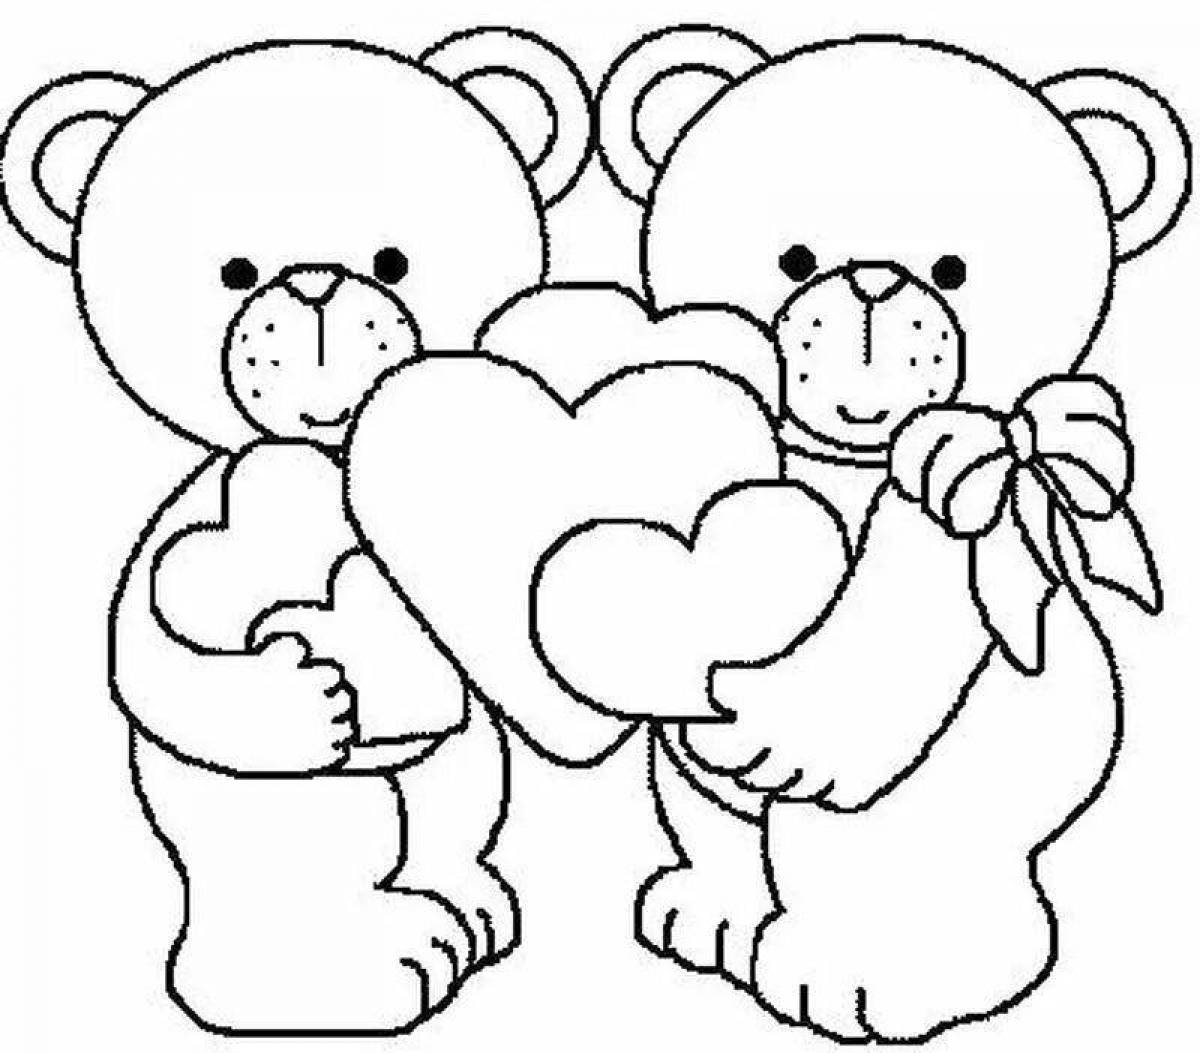 Coloring book brave bear with a heart